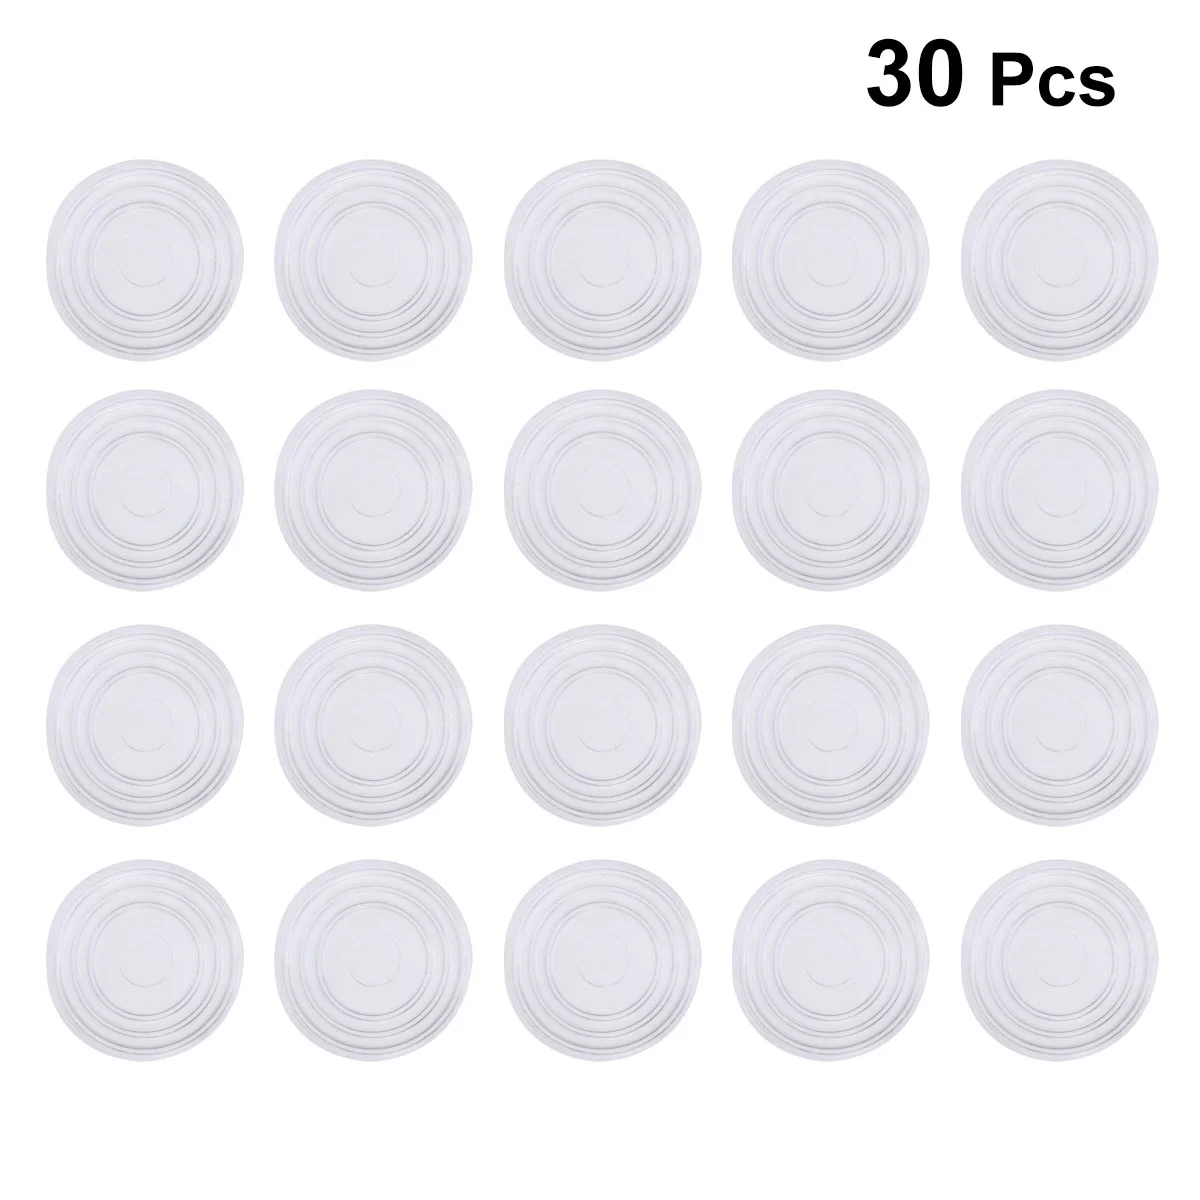 

30 Furniture Bumpers Round Glass Table Pads Clear Adhesive Bumper Pads Round Shape Non Grip Pads Glass TableRubber Feet Buffer